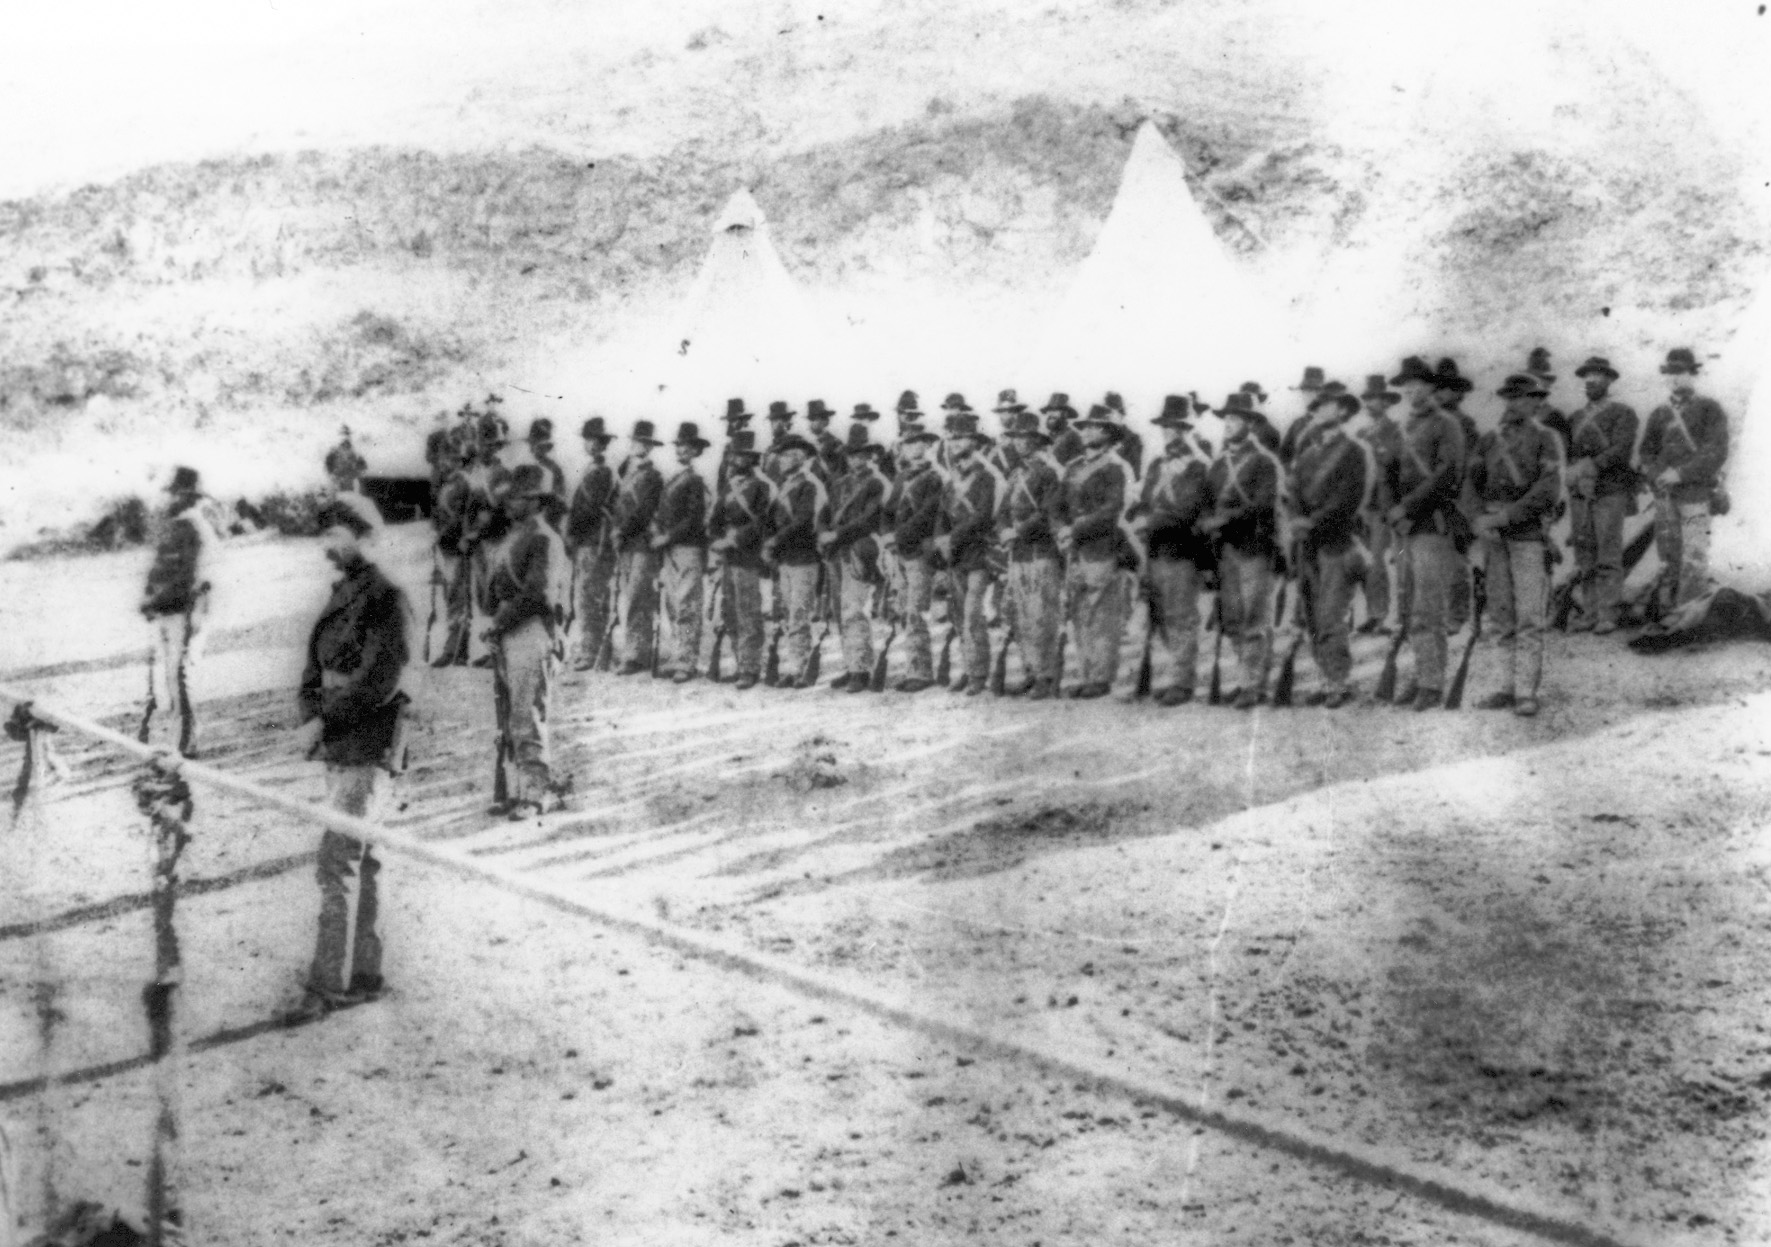 U.S. troops on parade before they depart for a reconnaissance of the lava beds. 